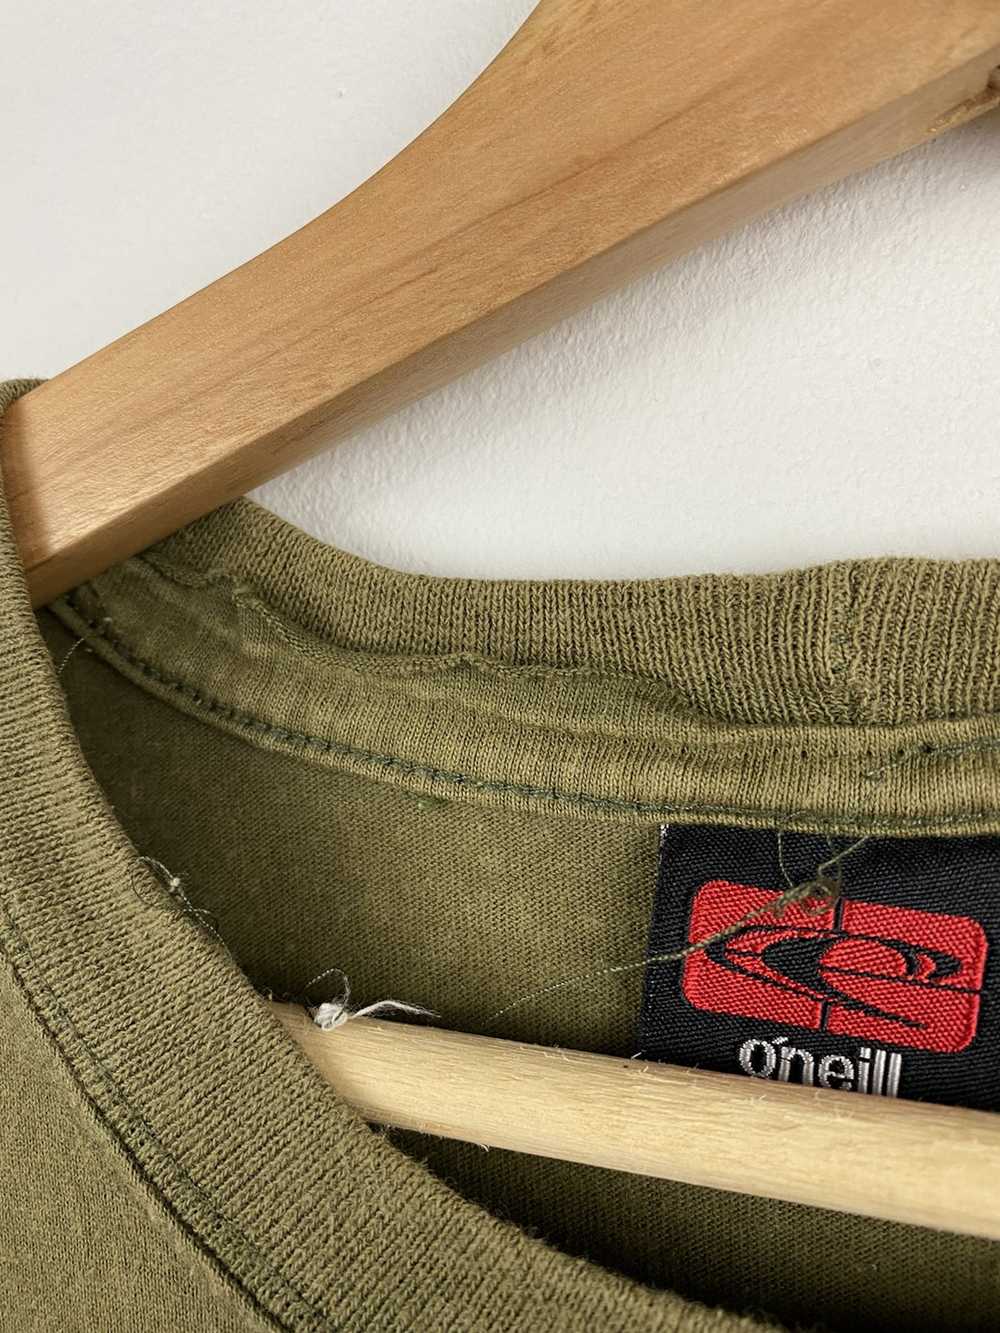 Oneill × Surf Style × Vintage Vintage Oneill Surf - image 7